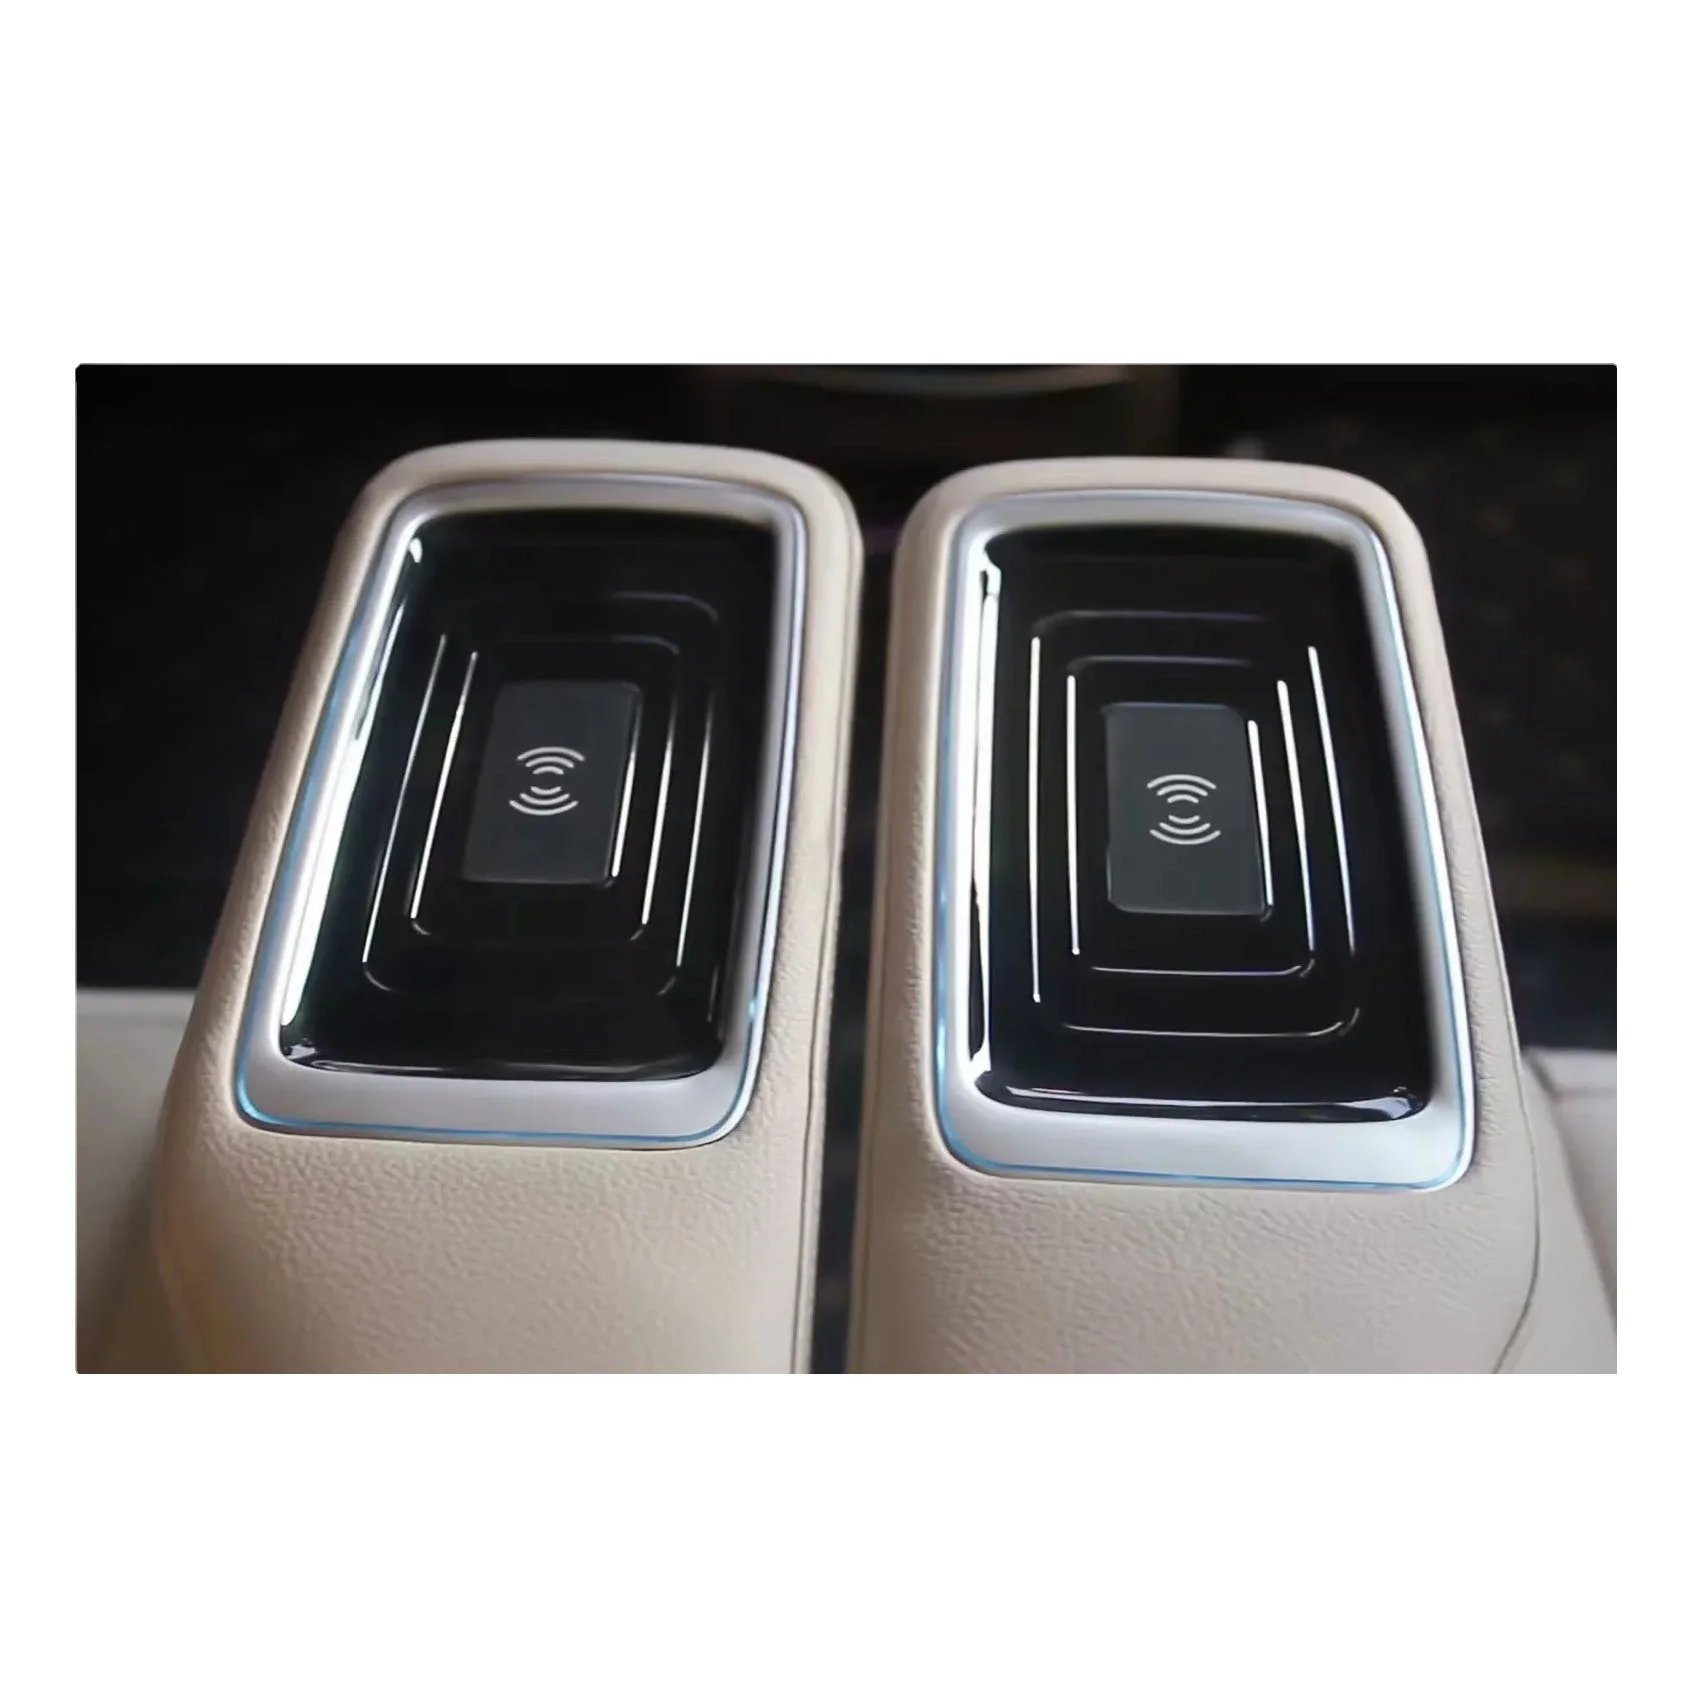 High Configuration Seat Accessories Mobile phone Wireless charger for Mercedes Benz V class V CLASS